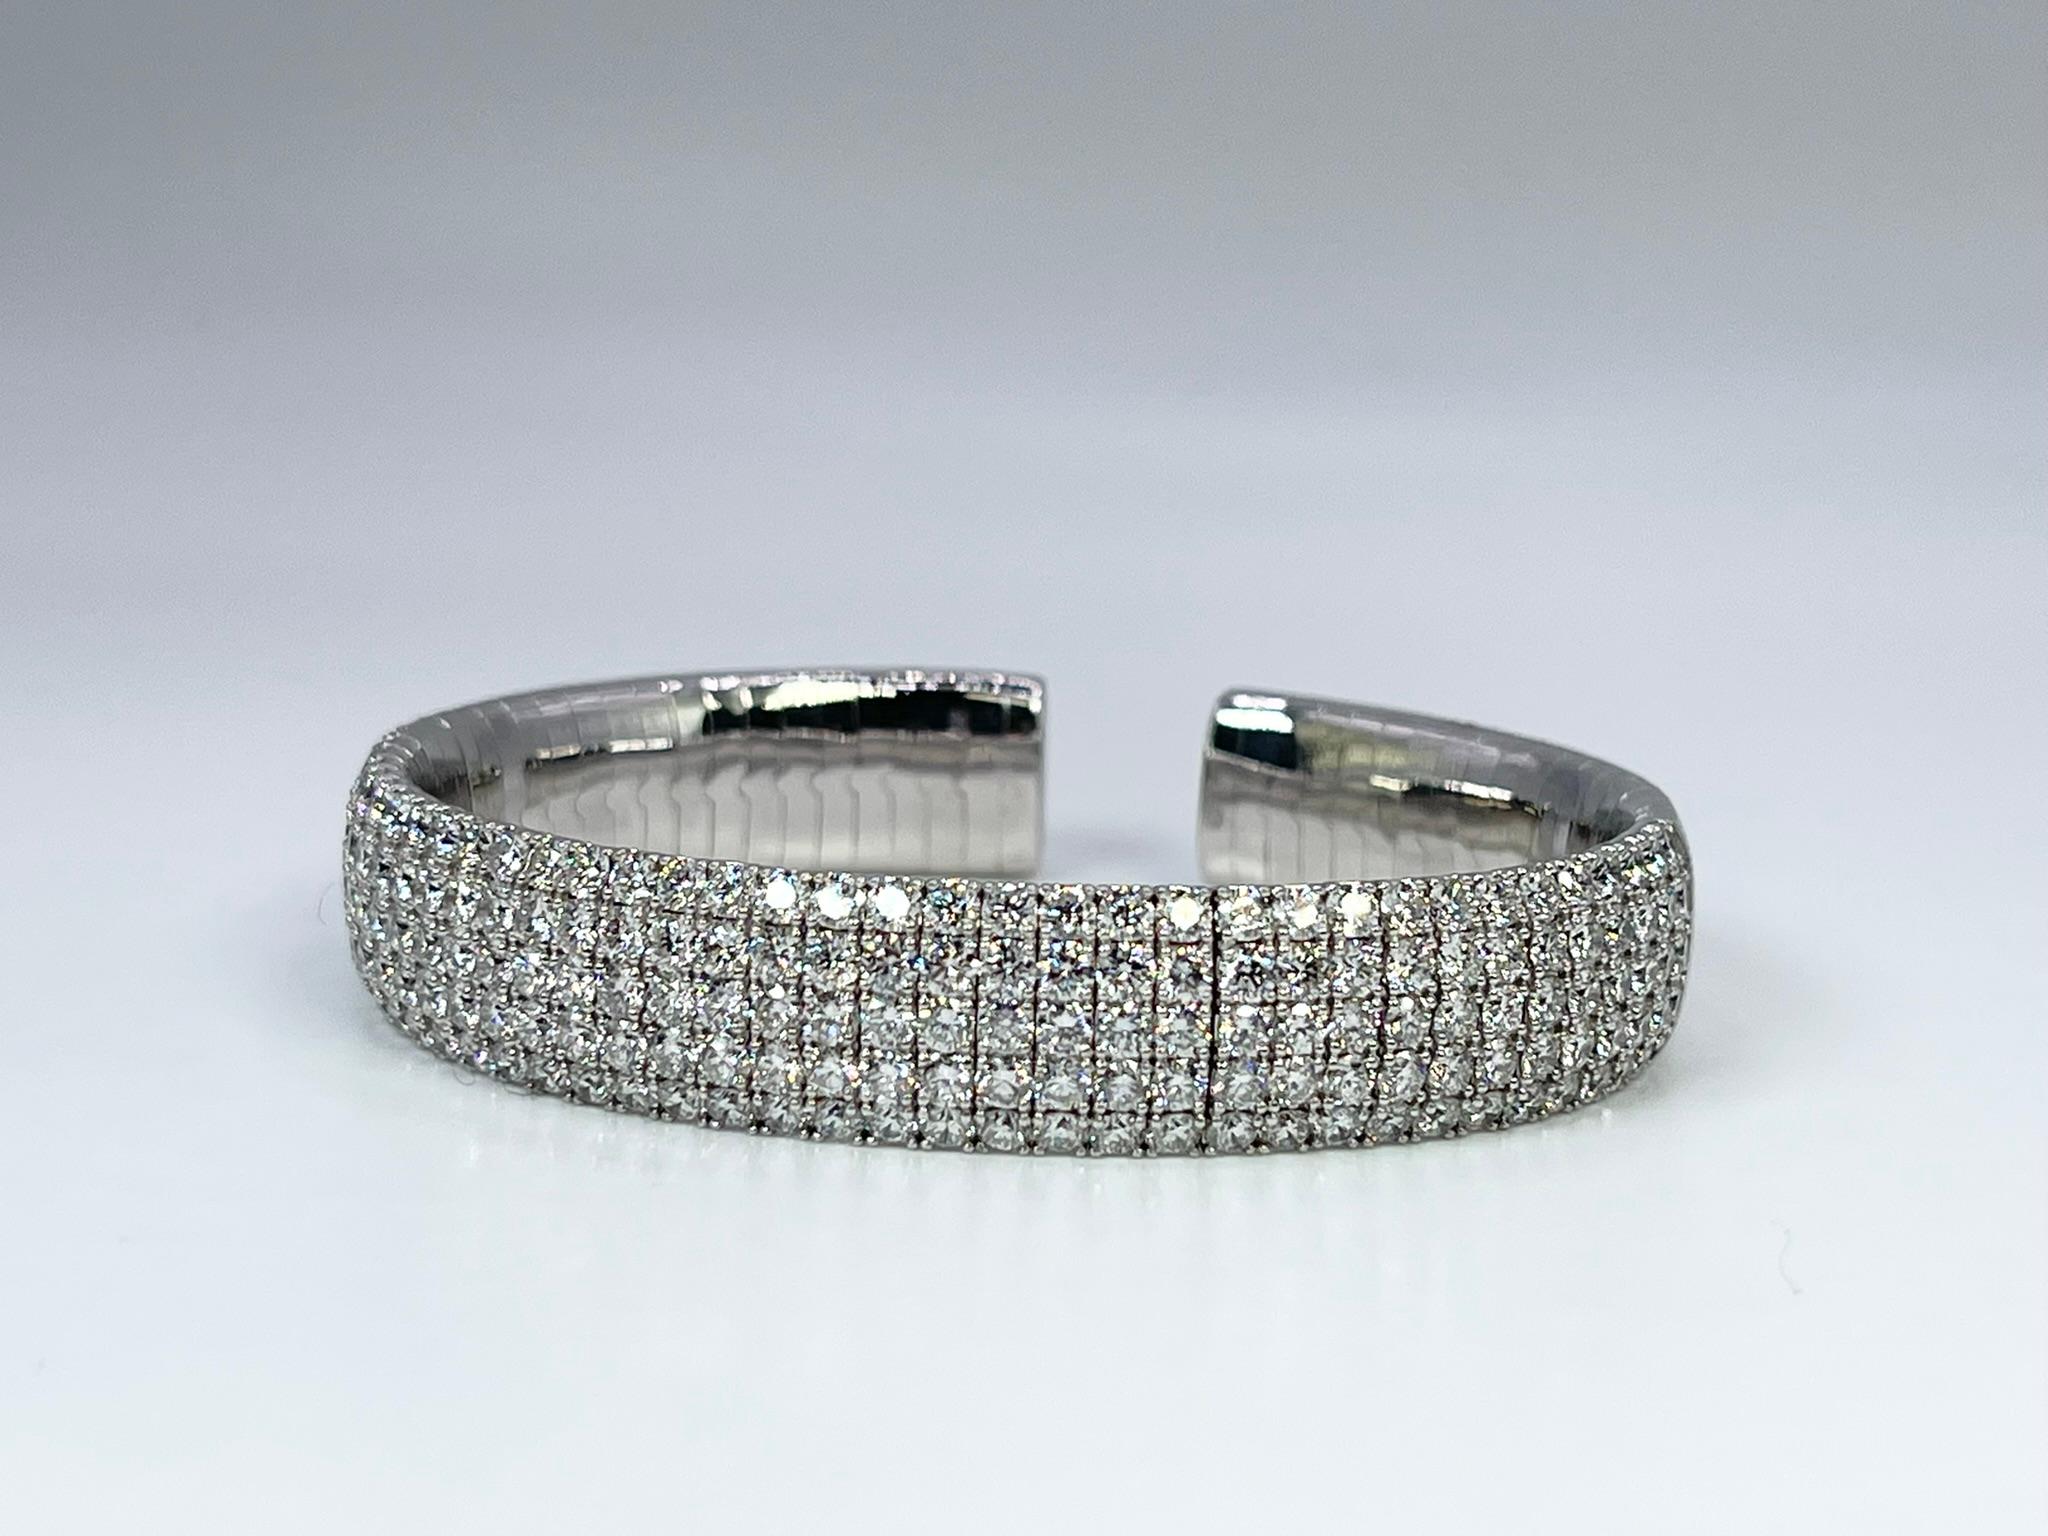 Diamond Tennis bracelet made in platinum, finished to perfections with fine diamonds and craftsmanship.

GRAM WEIGHT: 20.60gr
METAL: platinum

NATURAL DIAMOND(S)
Cut: Round Brilliant
Color: F-G 
Clarity: VS-SI 
Carat: 2.72ct
Length: 7